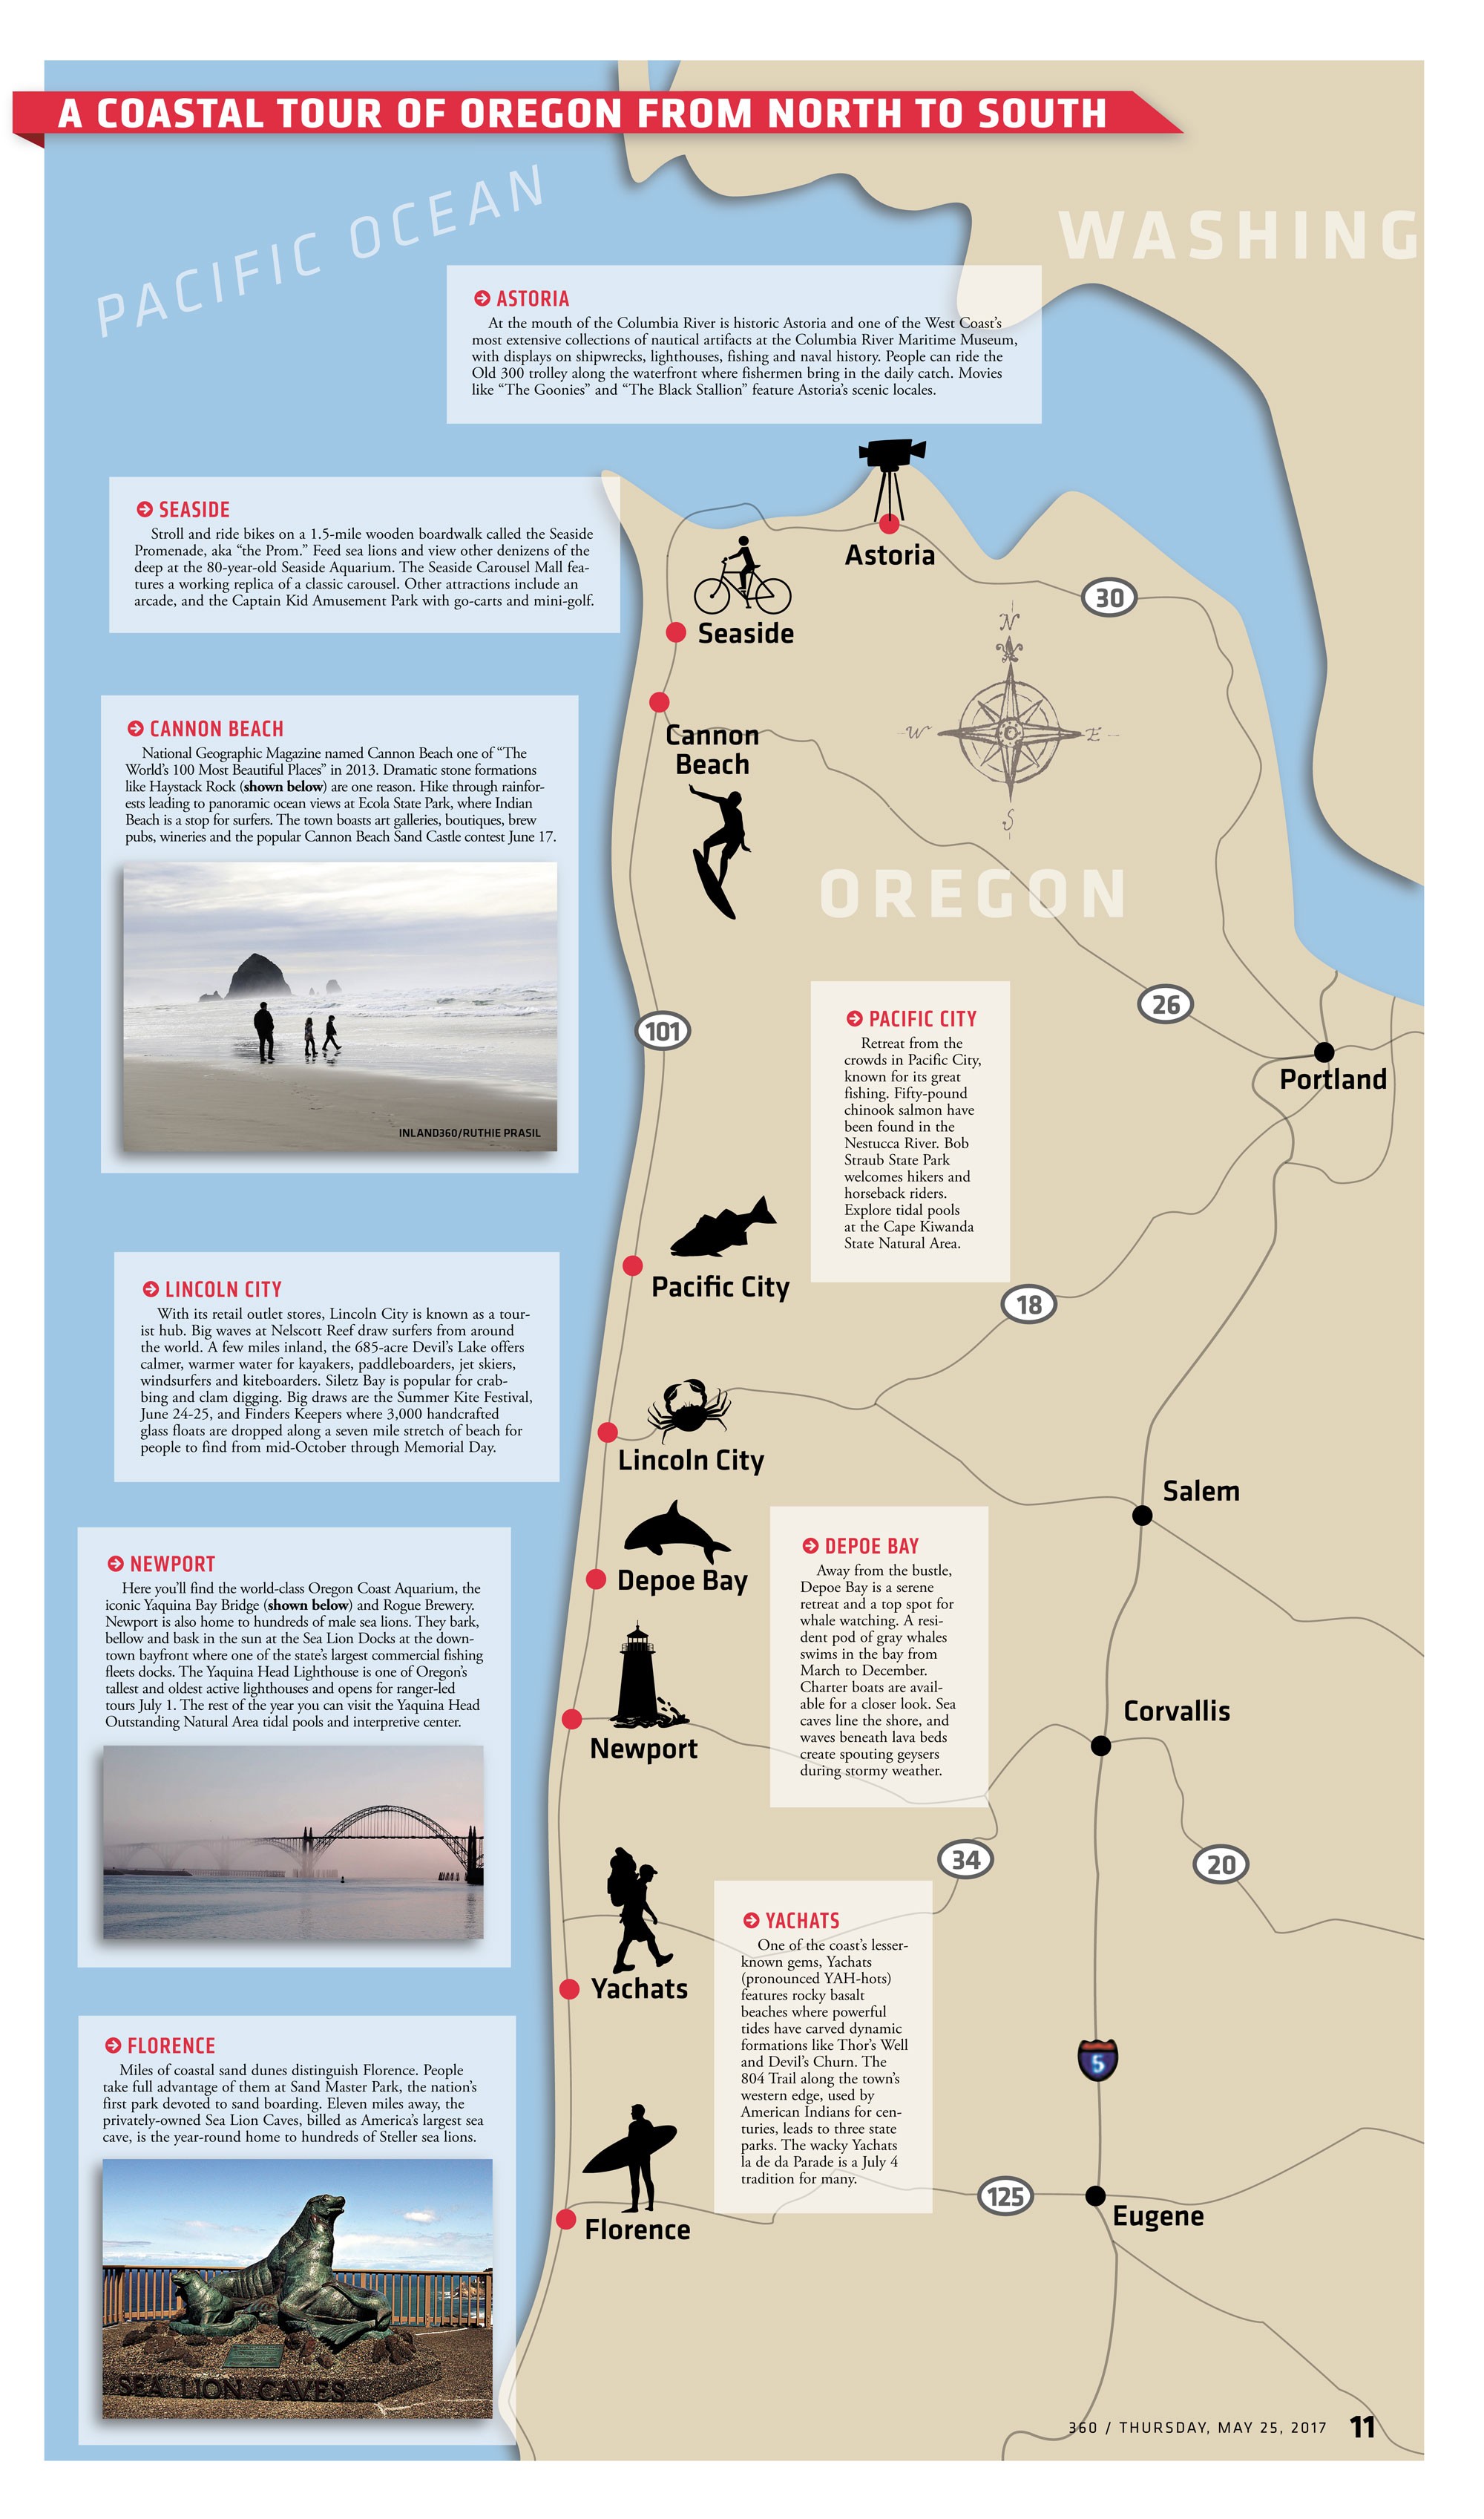 Travel: A tour of the Oregon coast from north to south